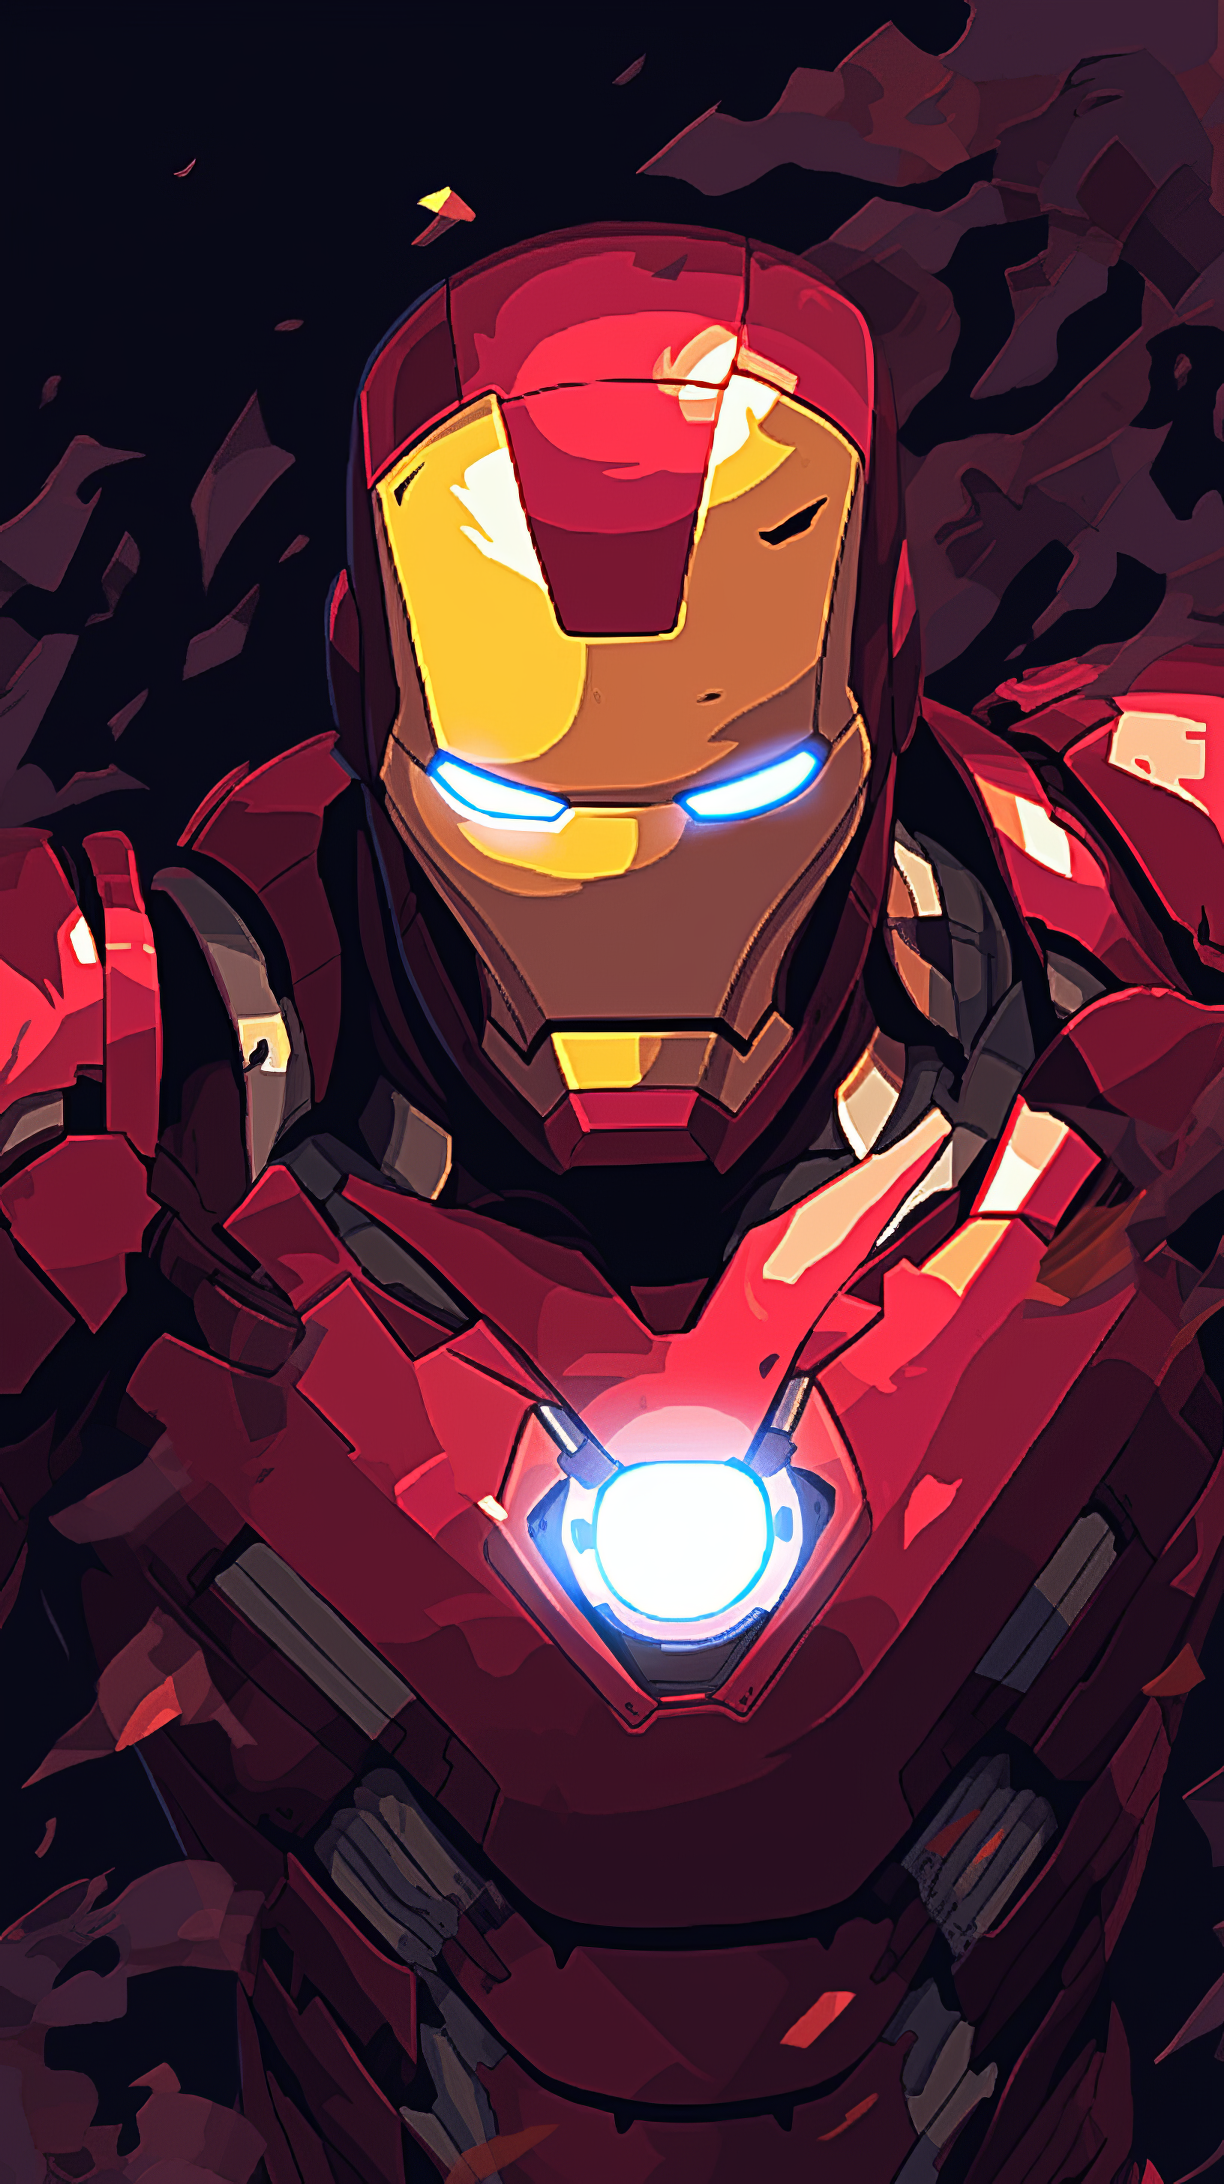 Stylized Iron Man phone wallpaper featuring the iconic superhero in his red and gold armor with glowing eyes and arc reactor.